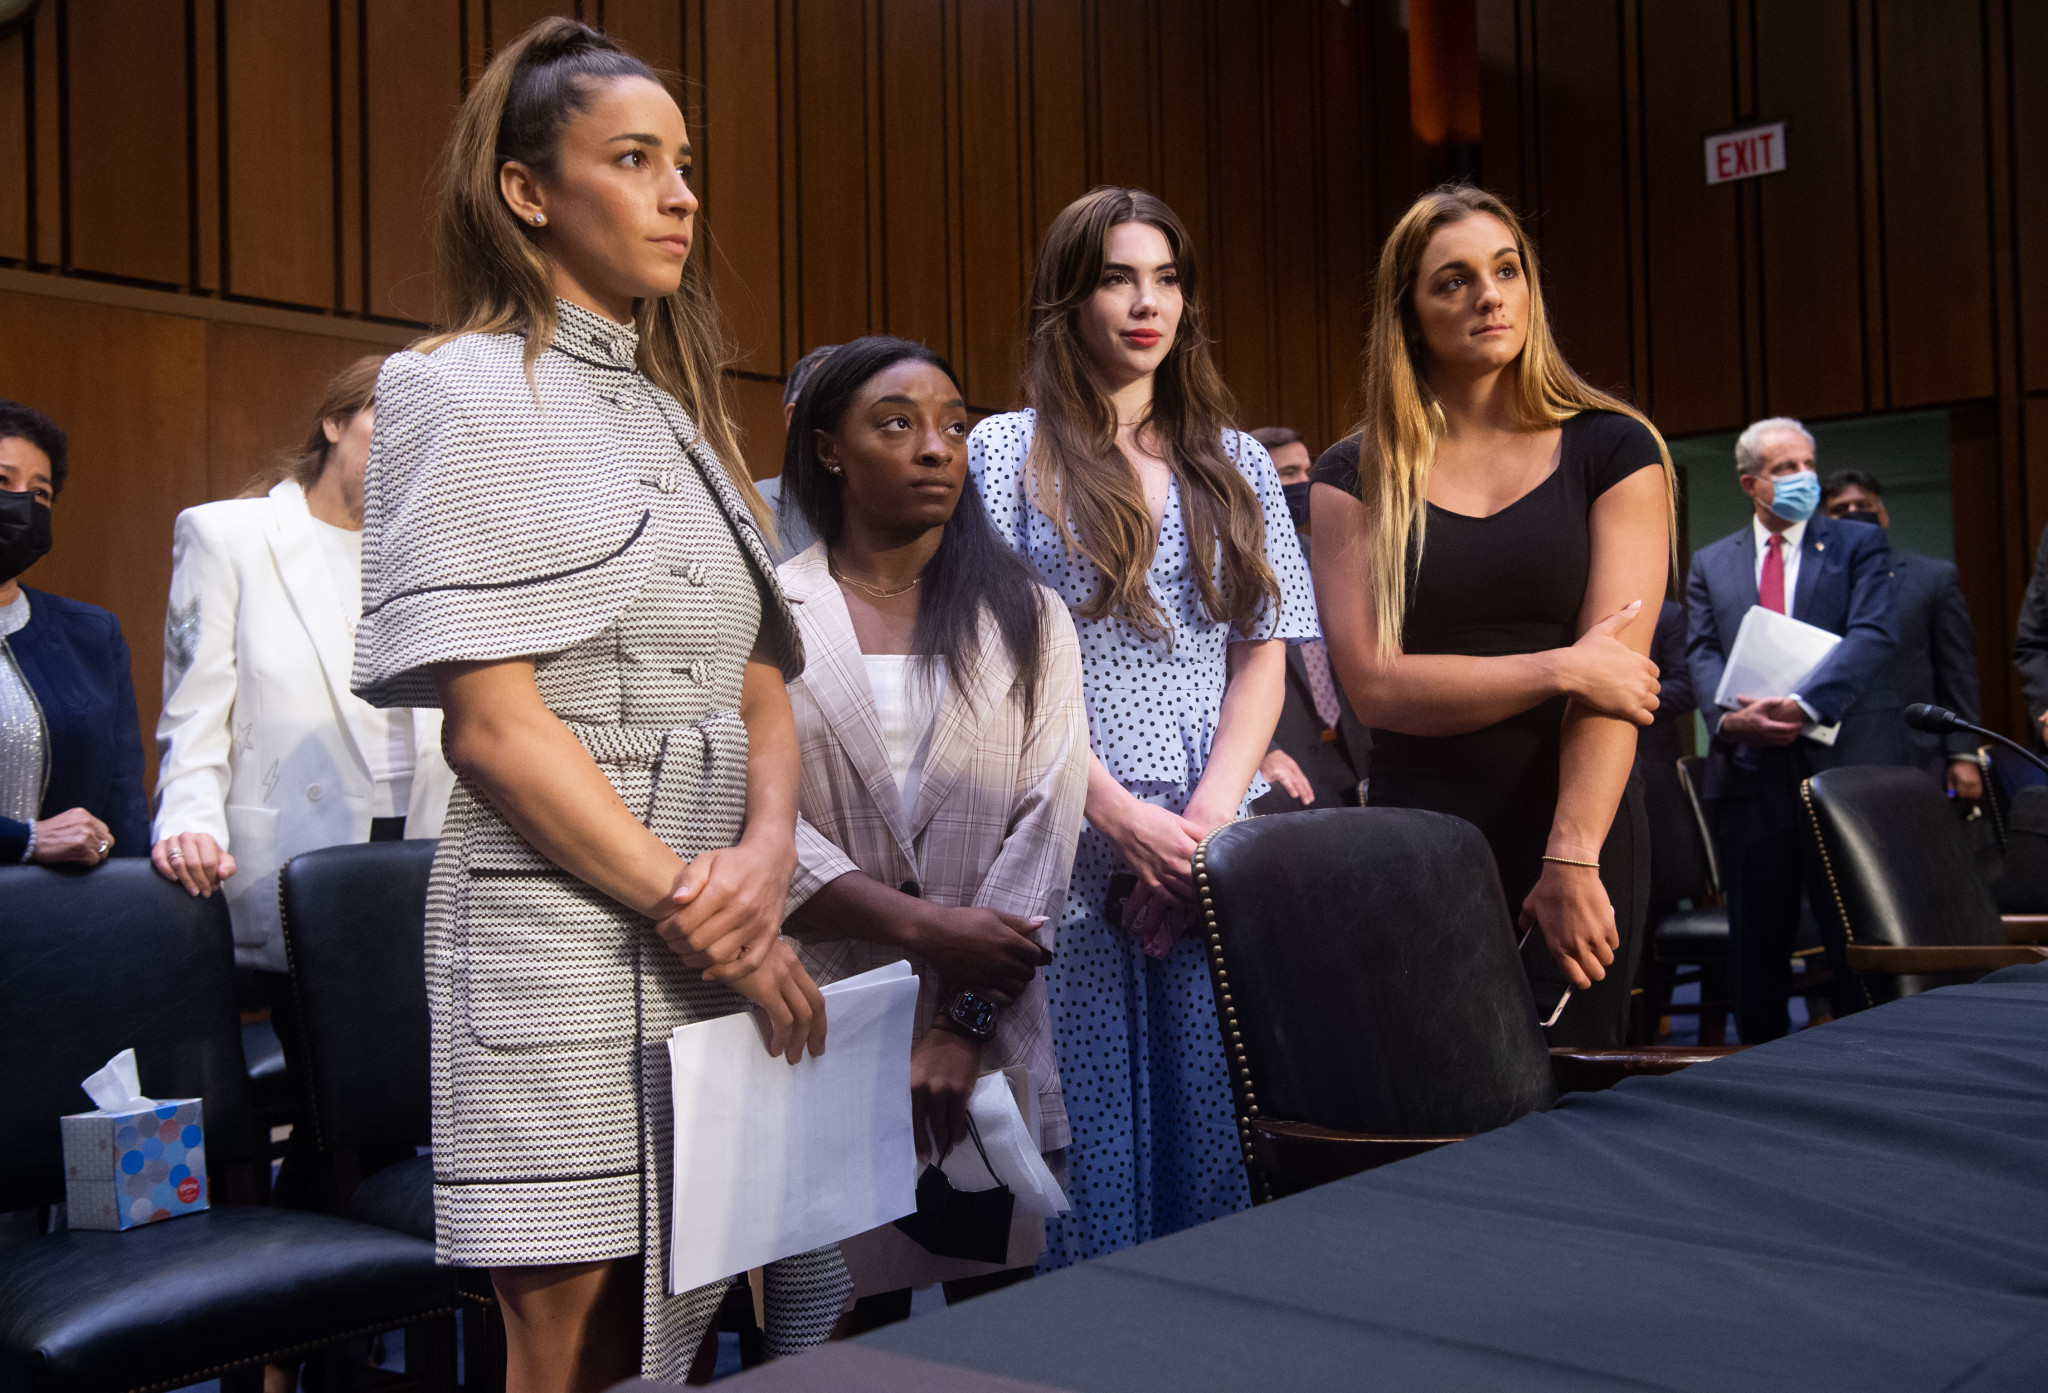 Aly Raisman, Simone Biles, McKayla Maroney and Maggie Nicholls, left to right, testified at a US Senate hearing earlier this year, criticising USA Gymnastics, the USOPC and the FBI ©Getty Images